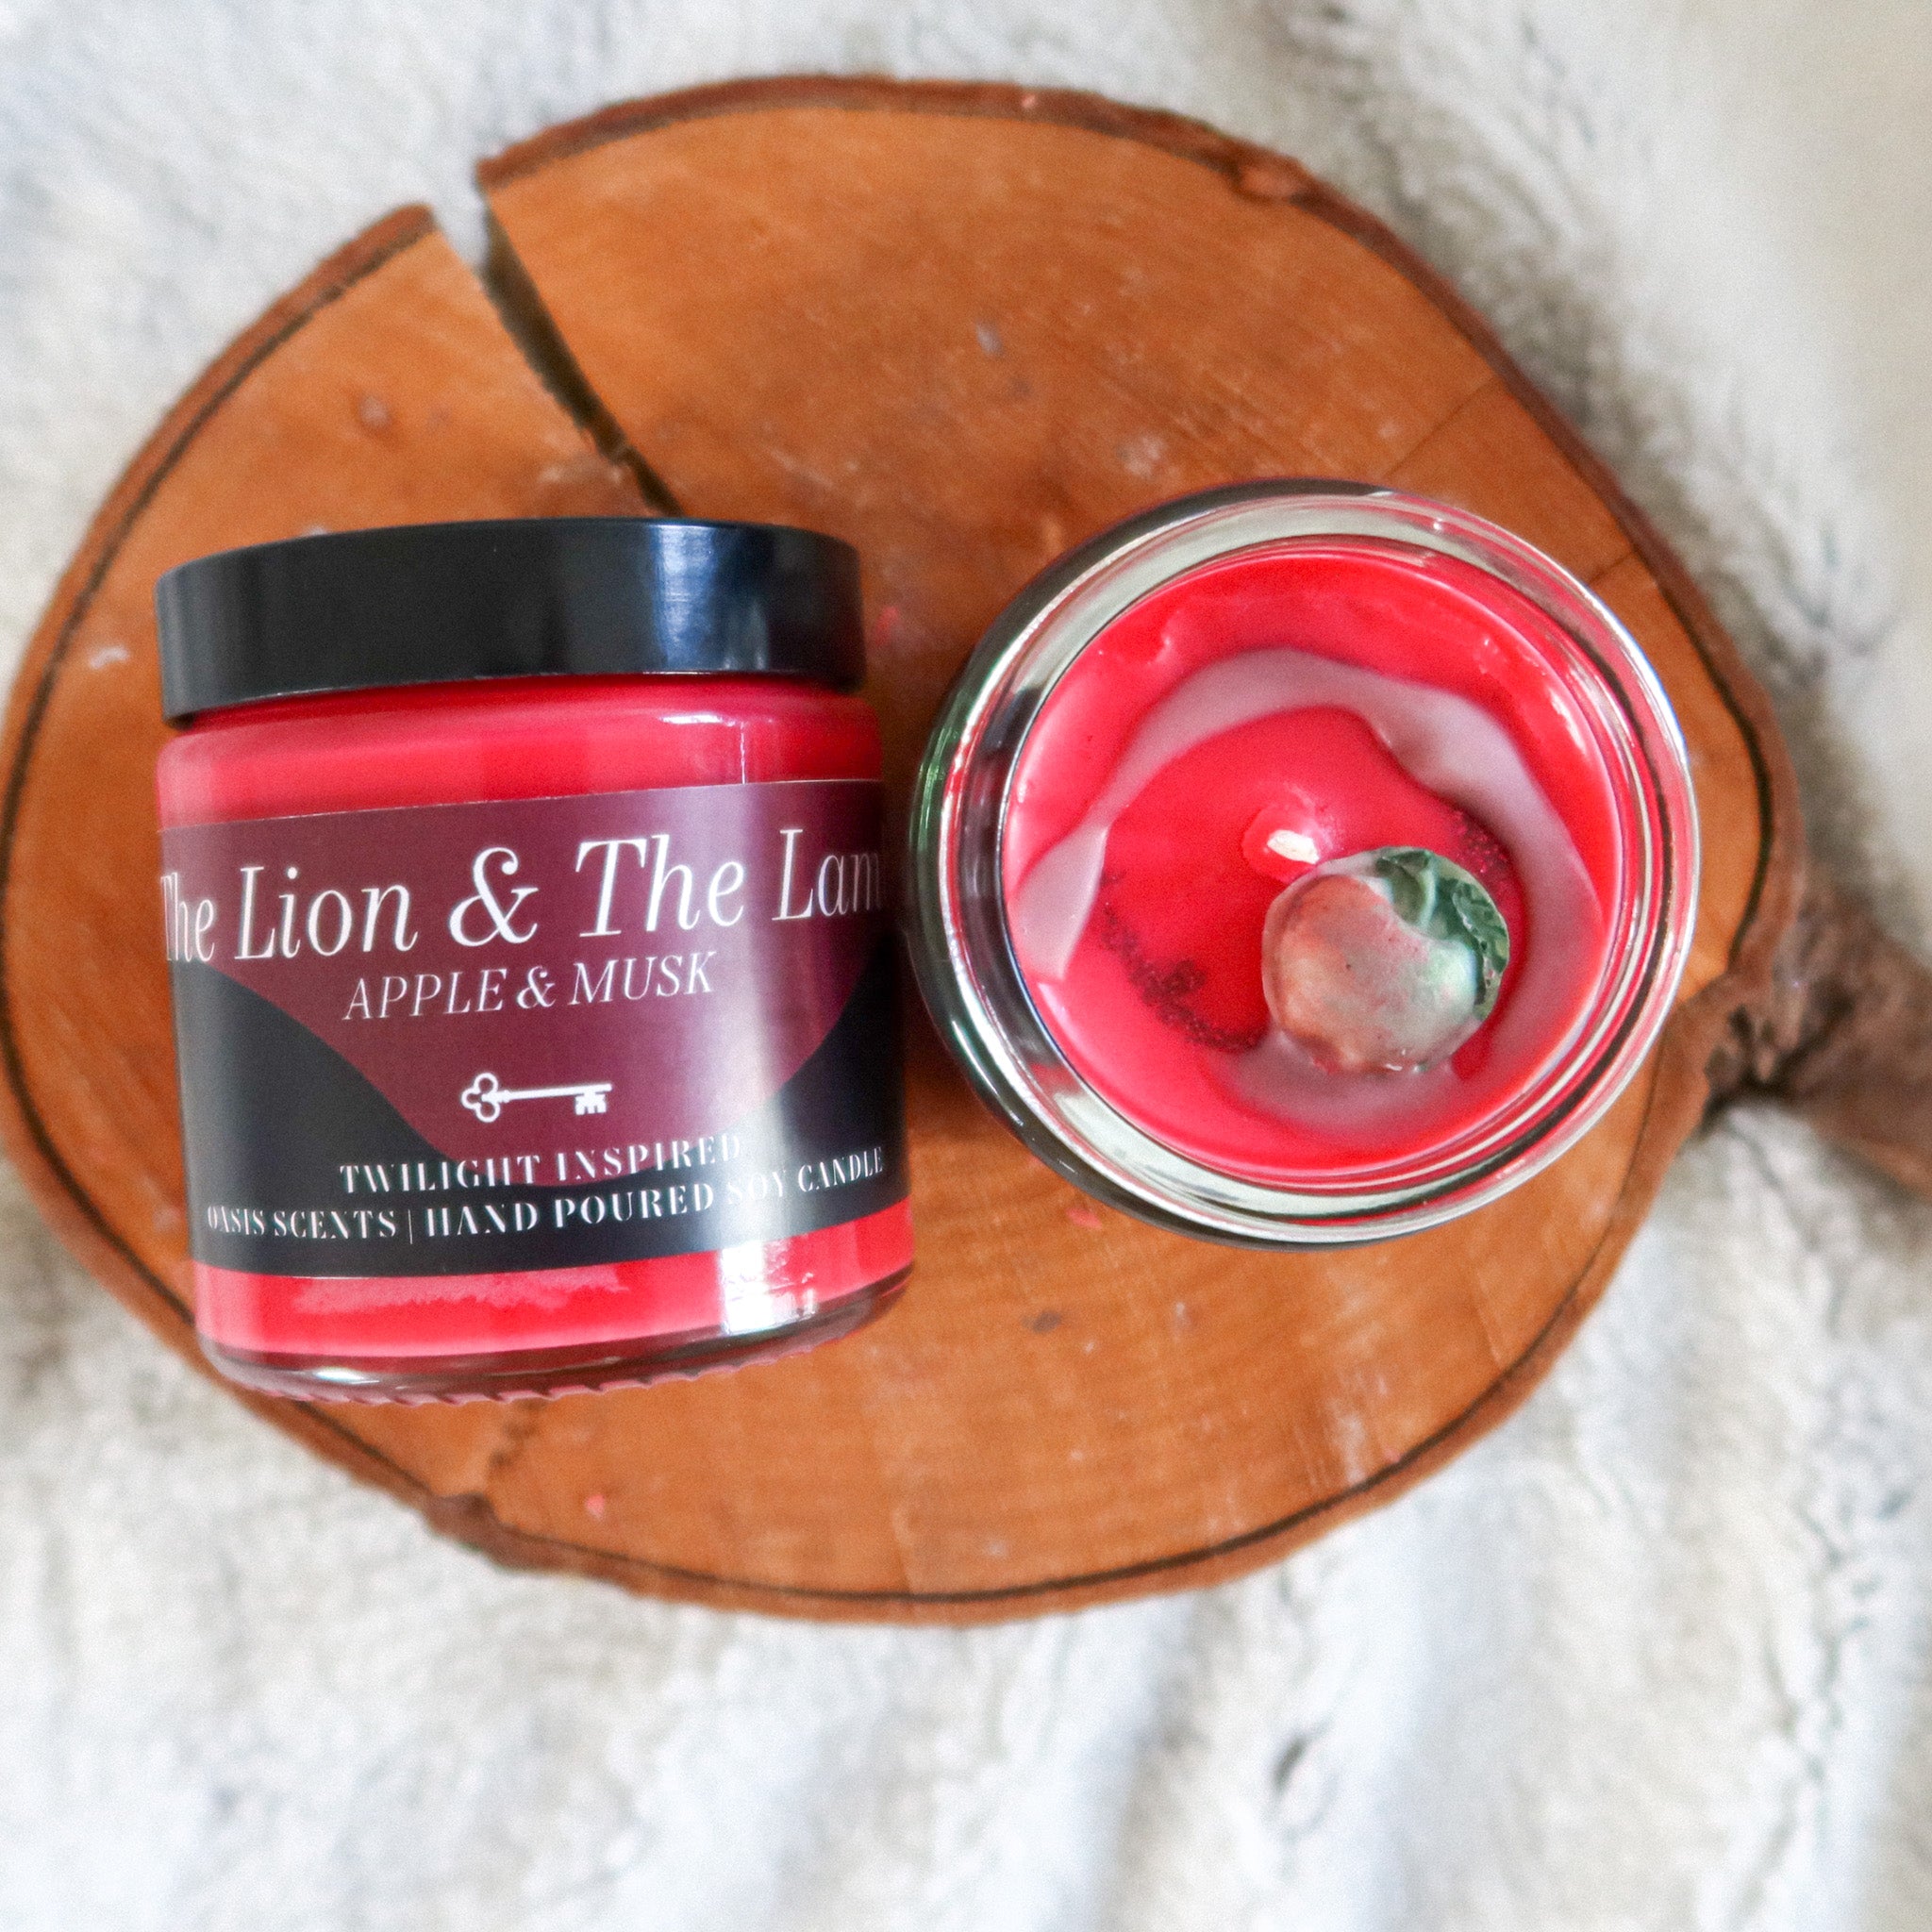 The Lion & The Lamb Soy Candle